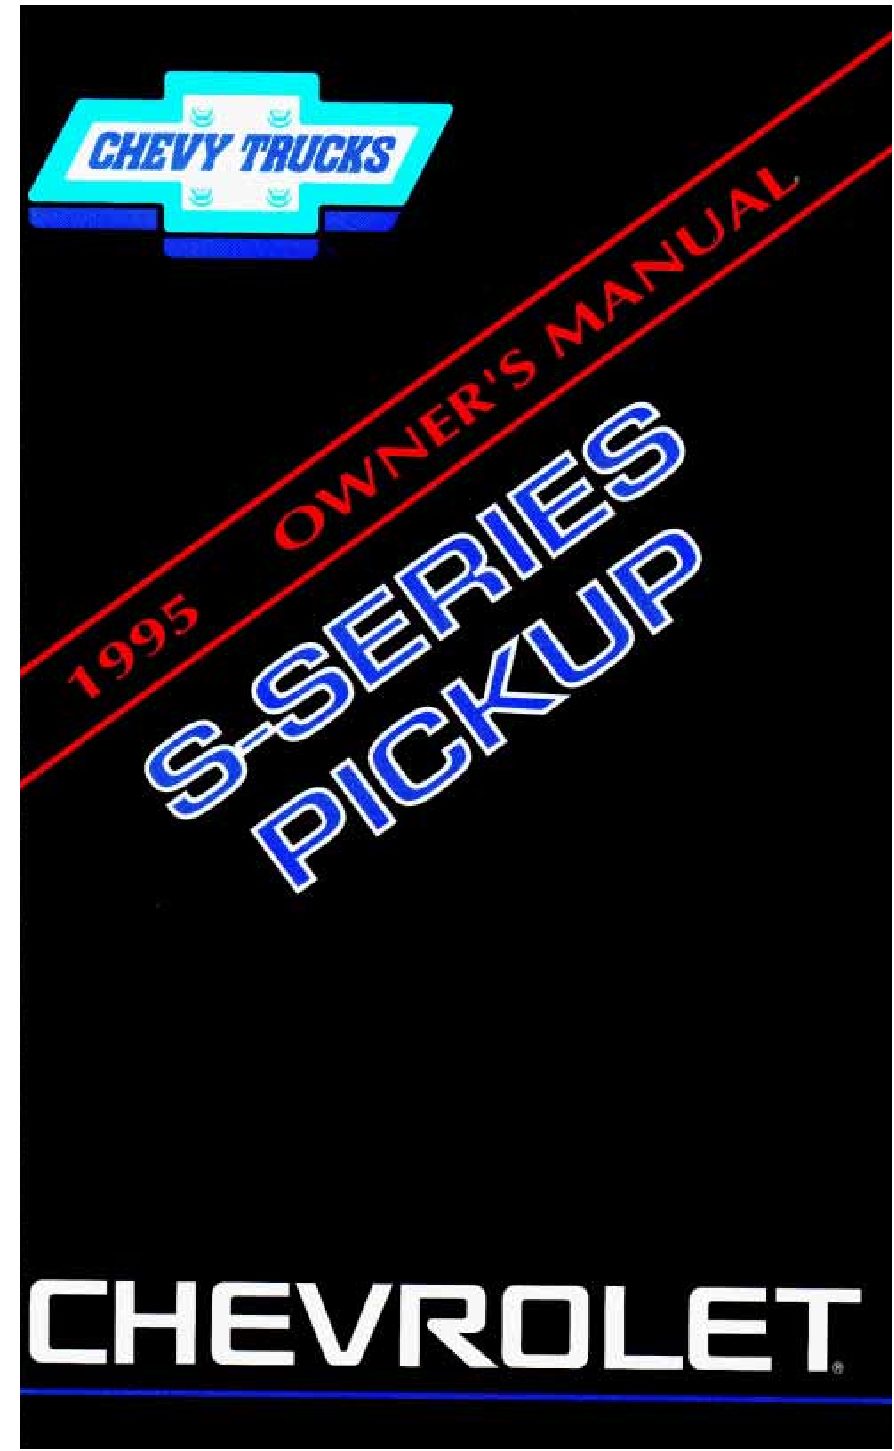 1995 Chevrolet S-10 Owner’s Manual Image